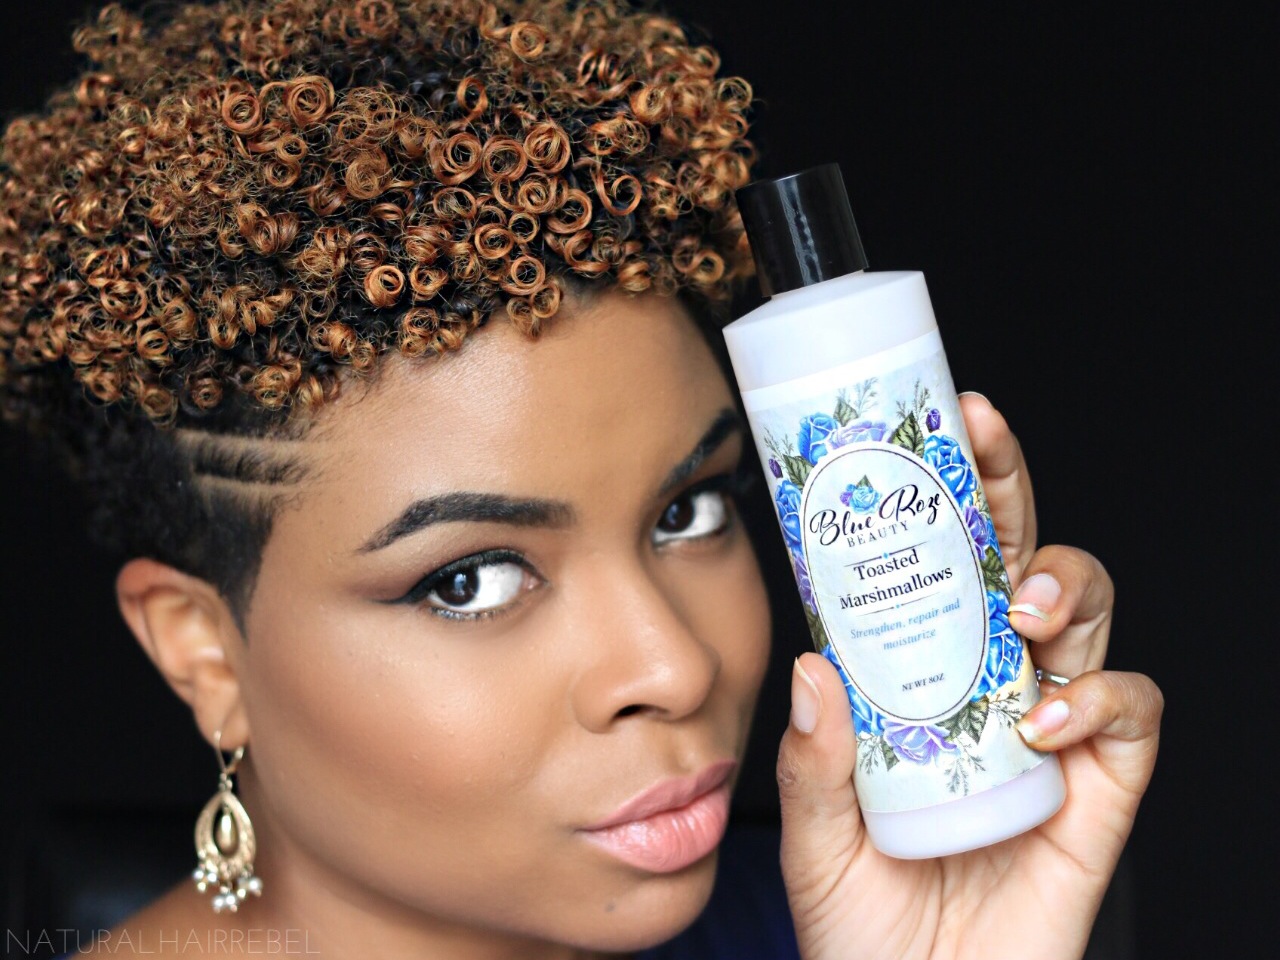 hair | blue roze beauty product review video | naturalhairrebel